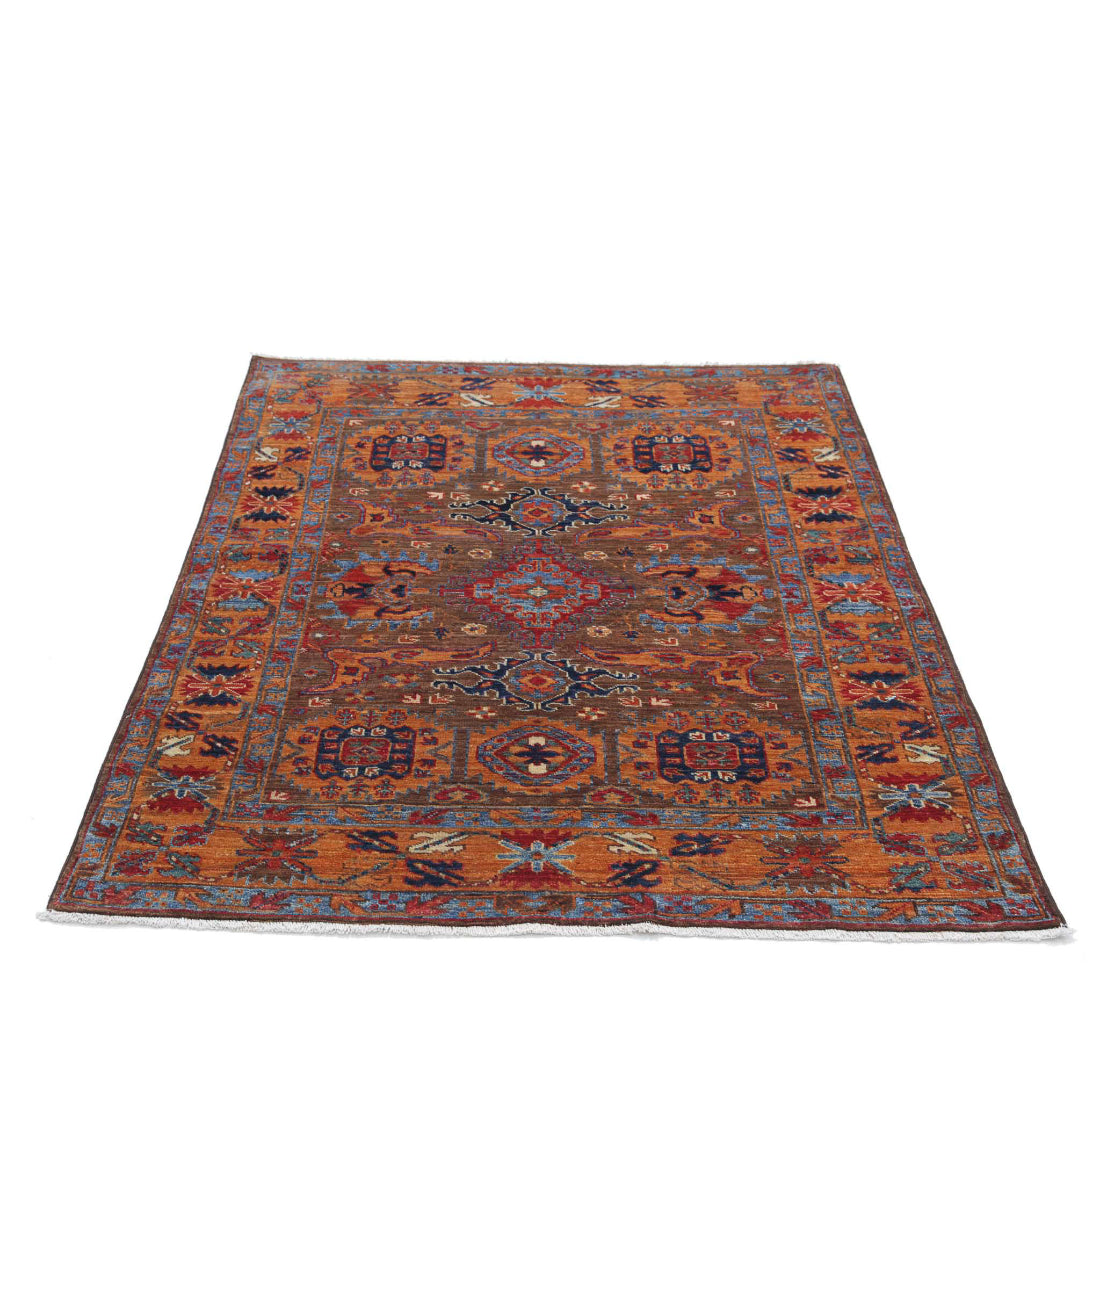 Hand Knotted Nomadic Caucasian Humna Wool Rug - 4'0'' x 4'10'' 4'0'' x 4'10'' (120 X 145) / Taupe / Gold